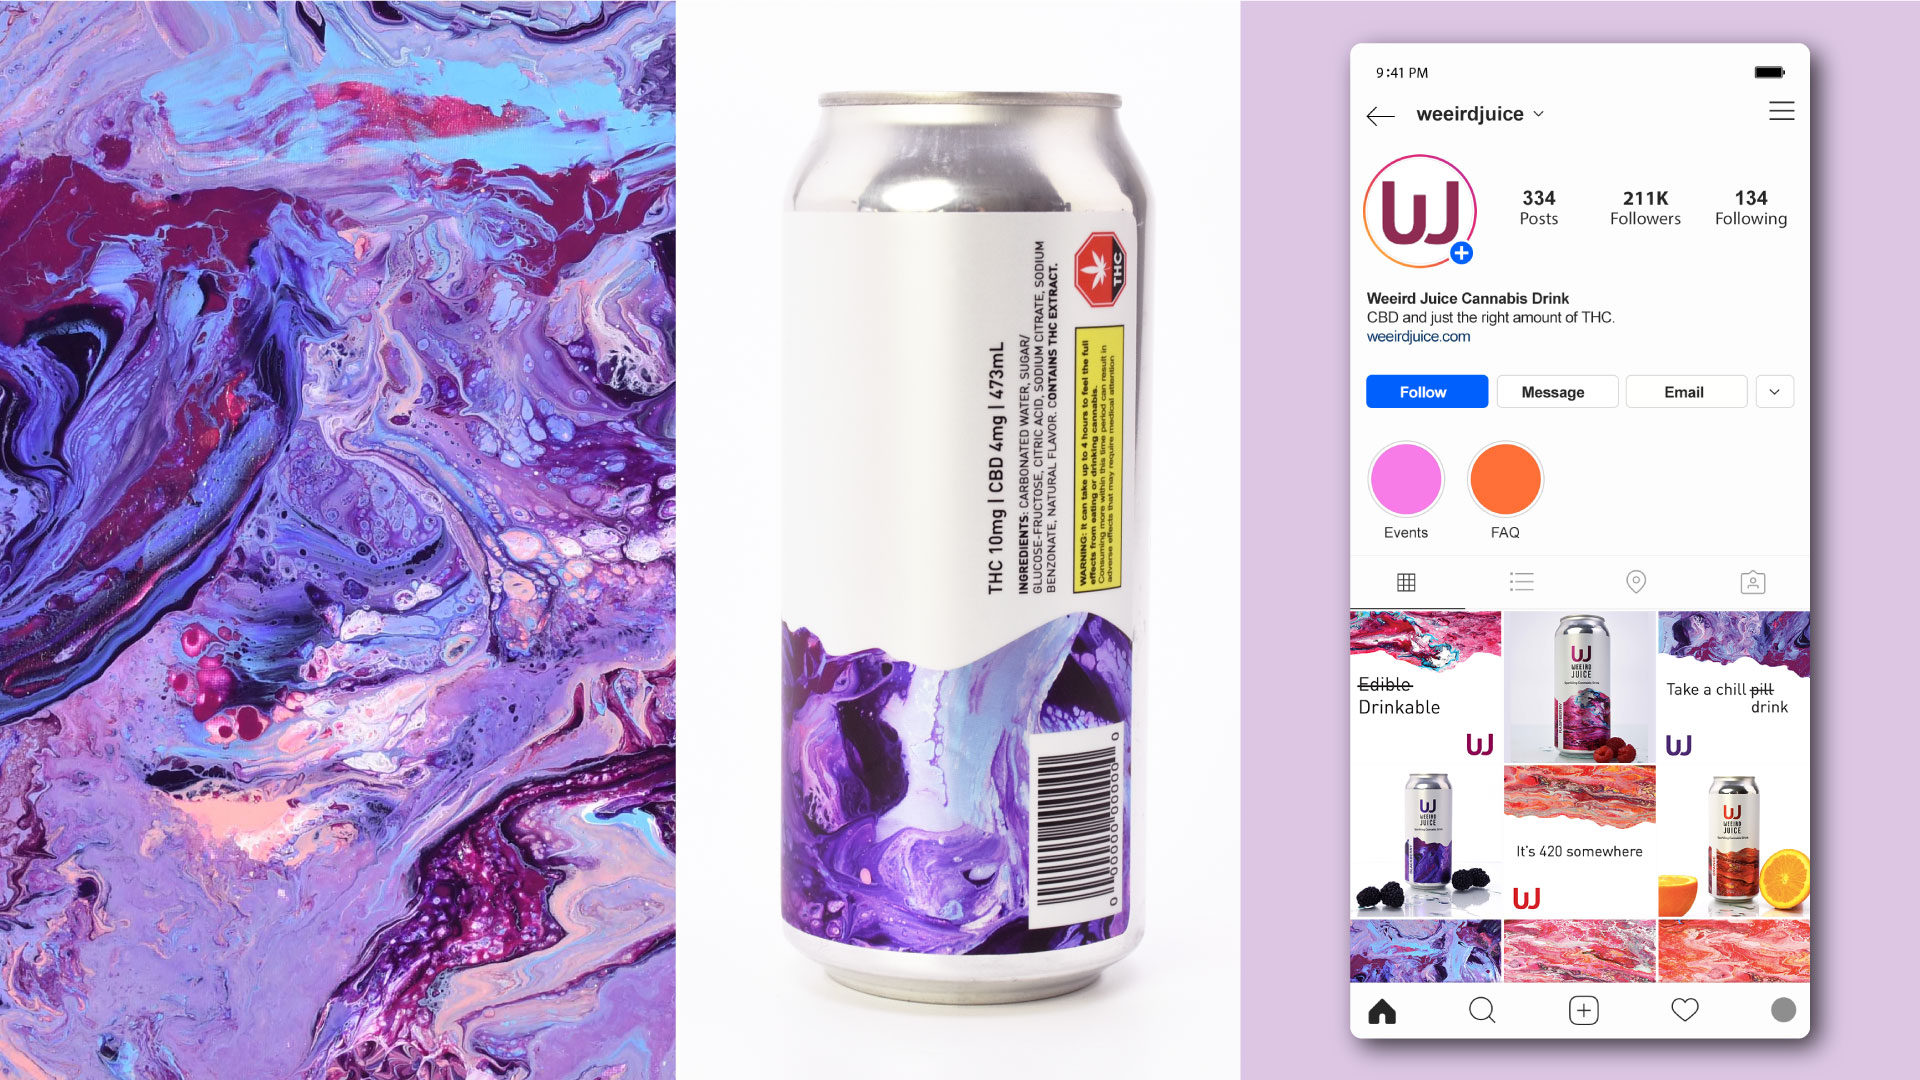 instagram advertising feed for a fictional cannabis brand weeird juice that creates cannabis beverages